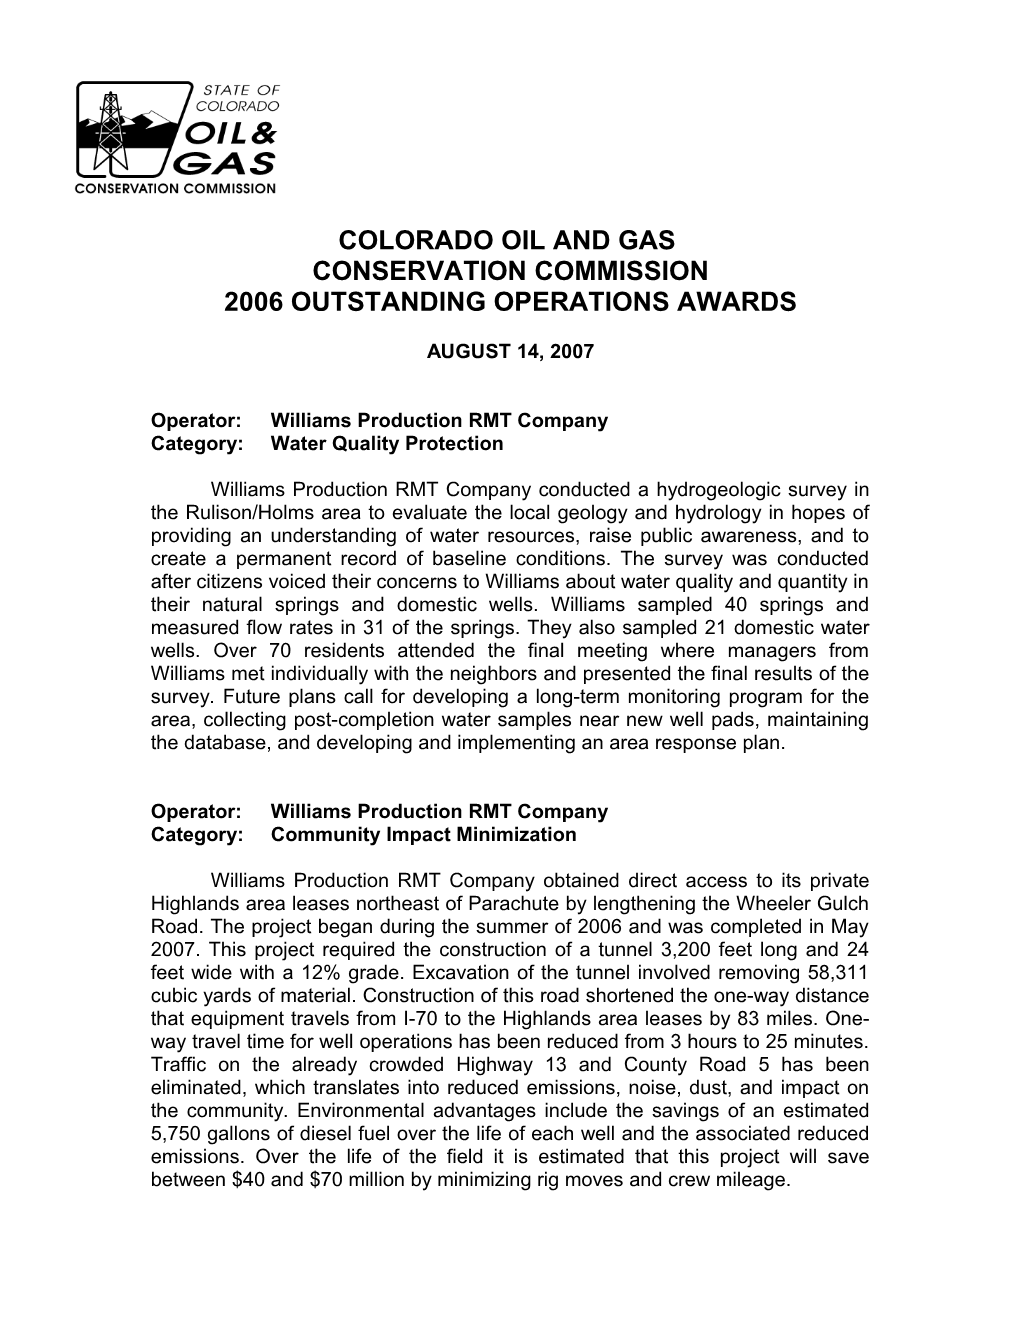 Colorado Oil and Gas Conservation Commission